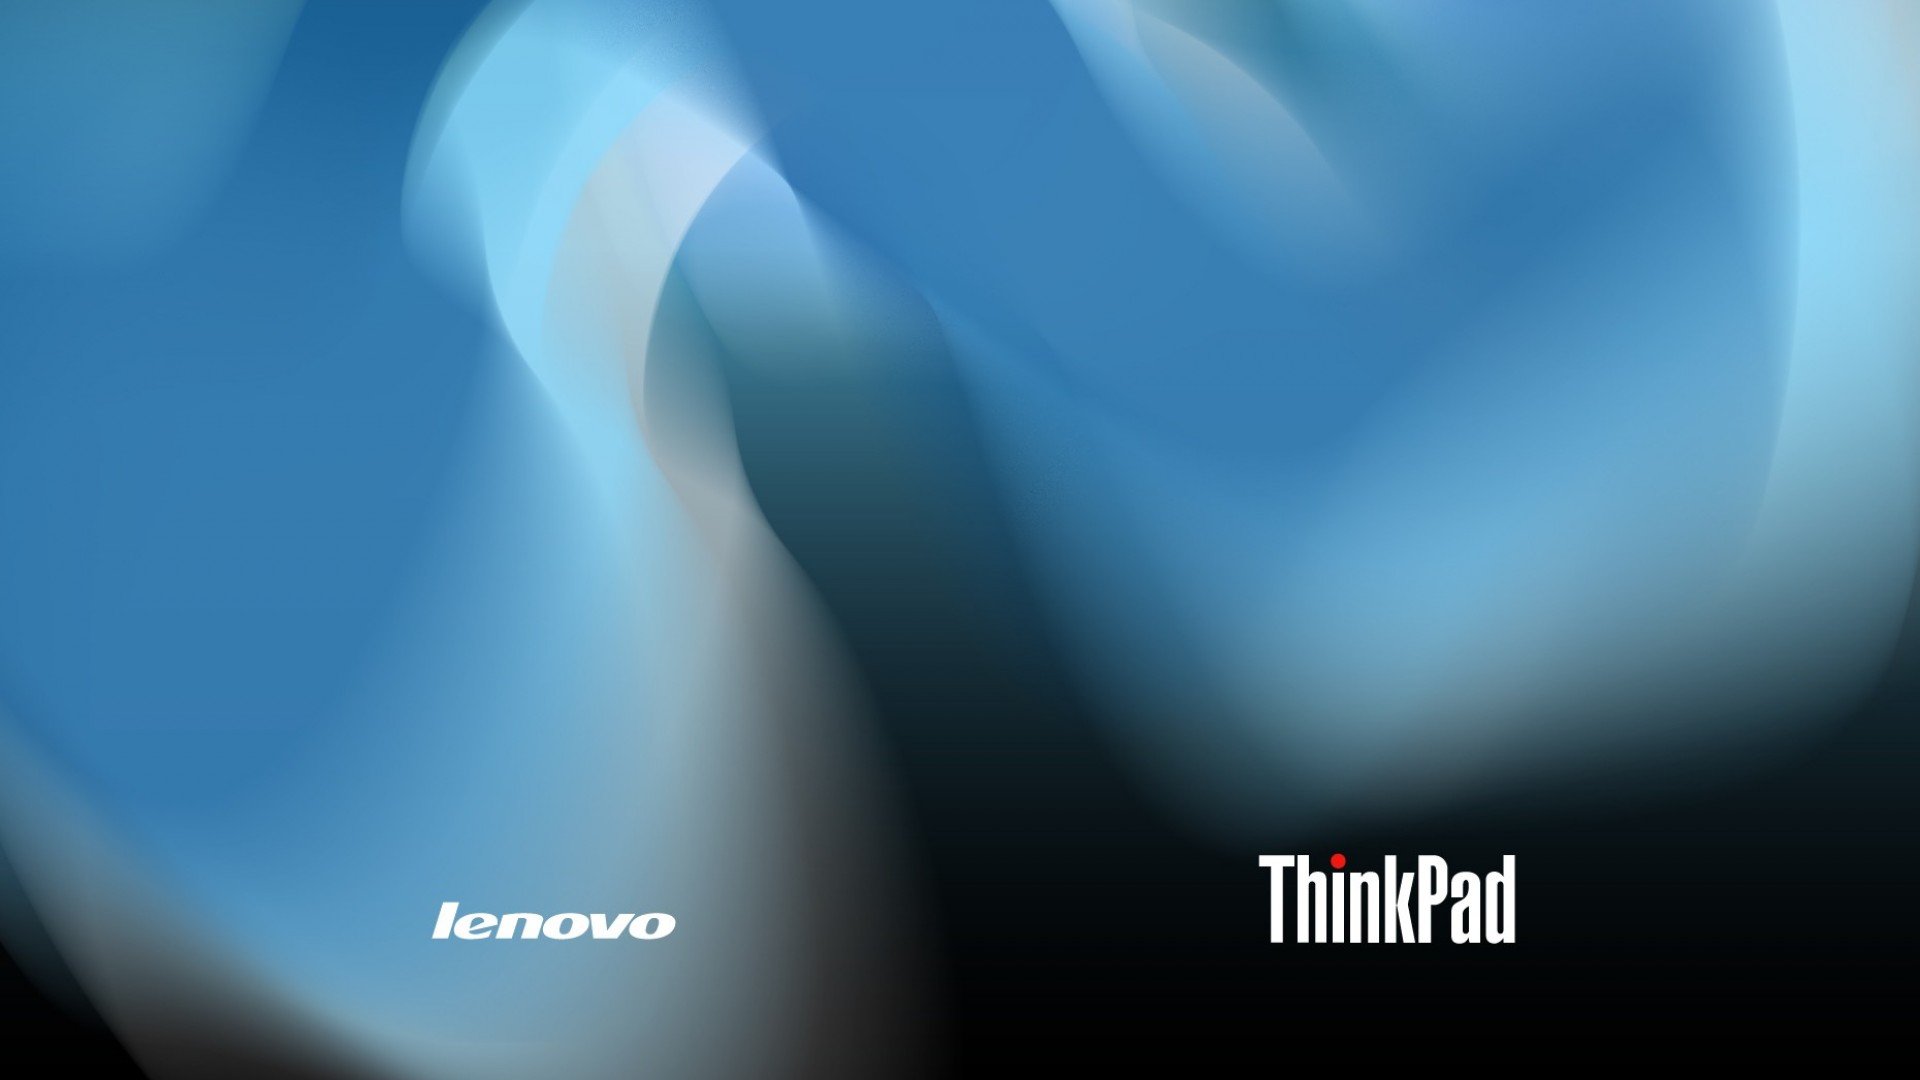 Lenovo Wallpapers High Quality Download Free